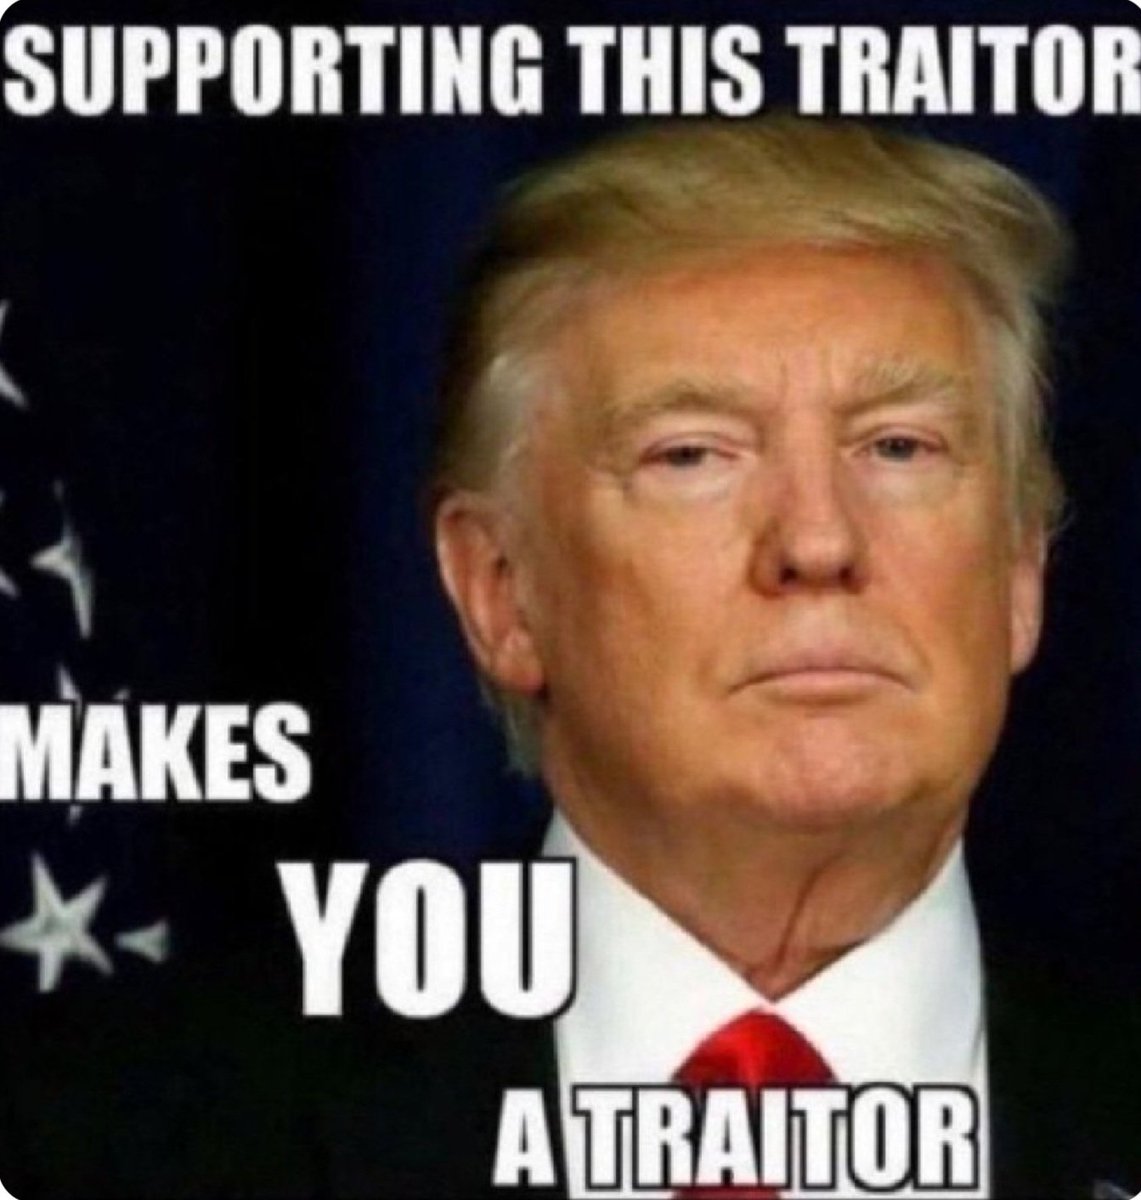 There is no doubt in my mind that tRump, his family, his maga cult insurrectionists in our government & his cult sheep are traitors to our country. They have proven to us they are. They have proven to us that they will do anything for power.